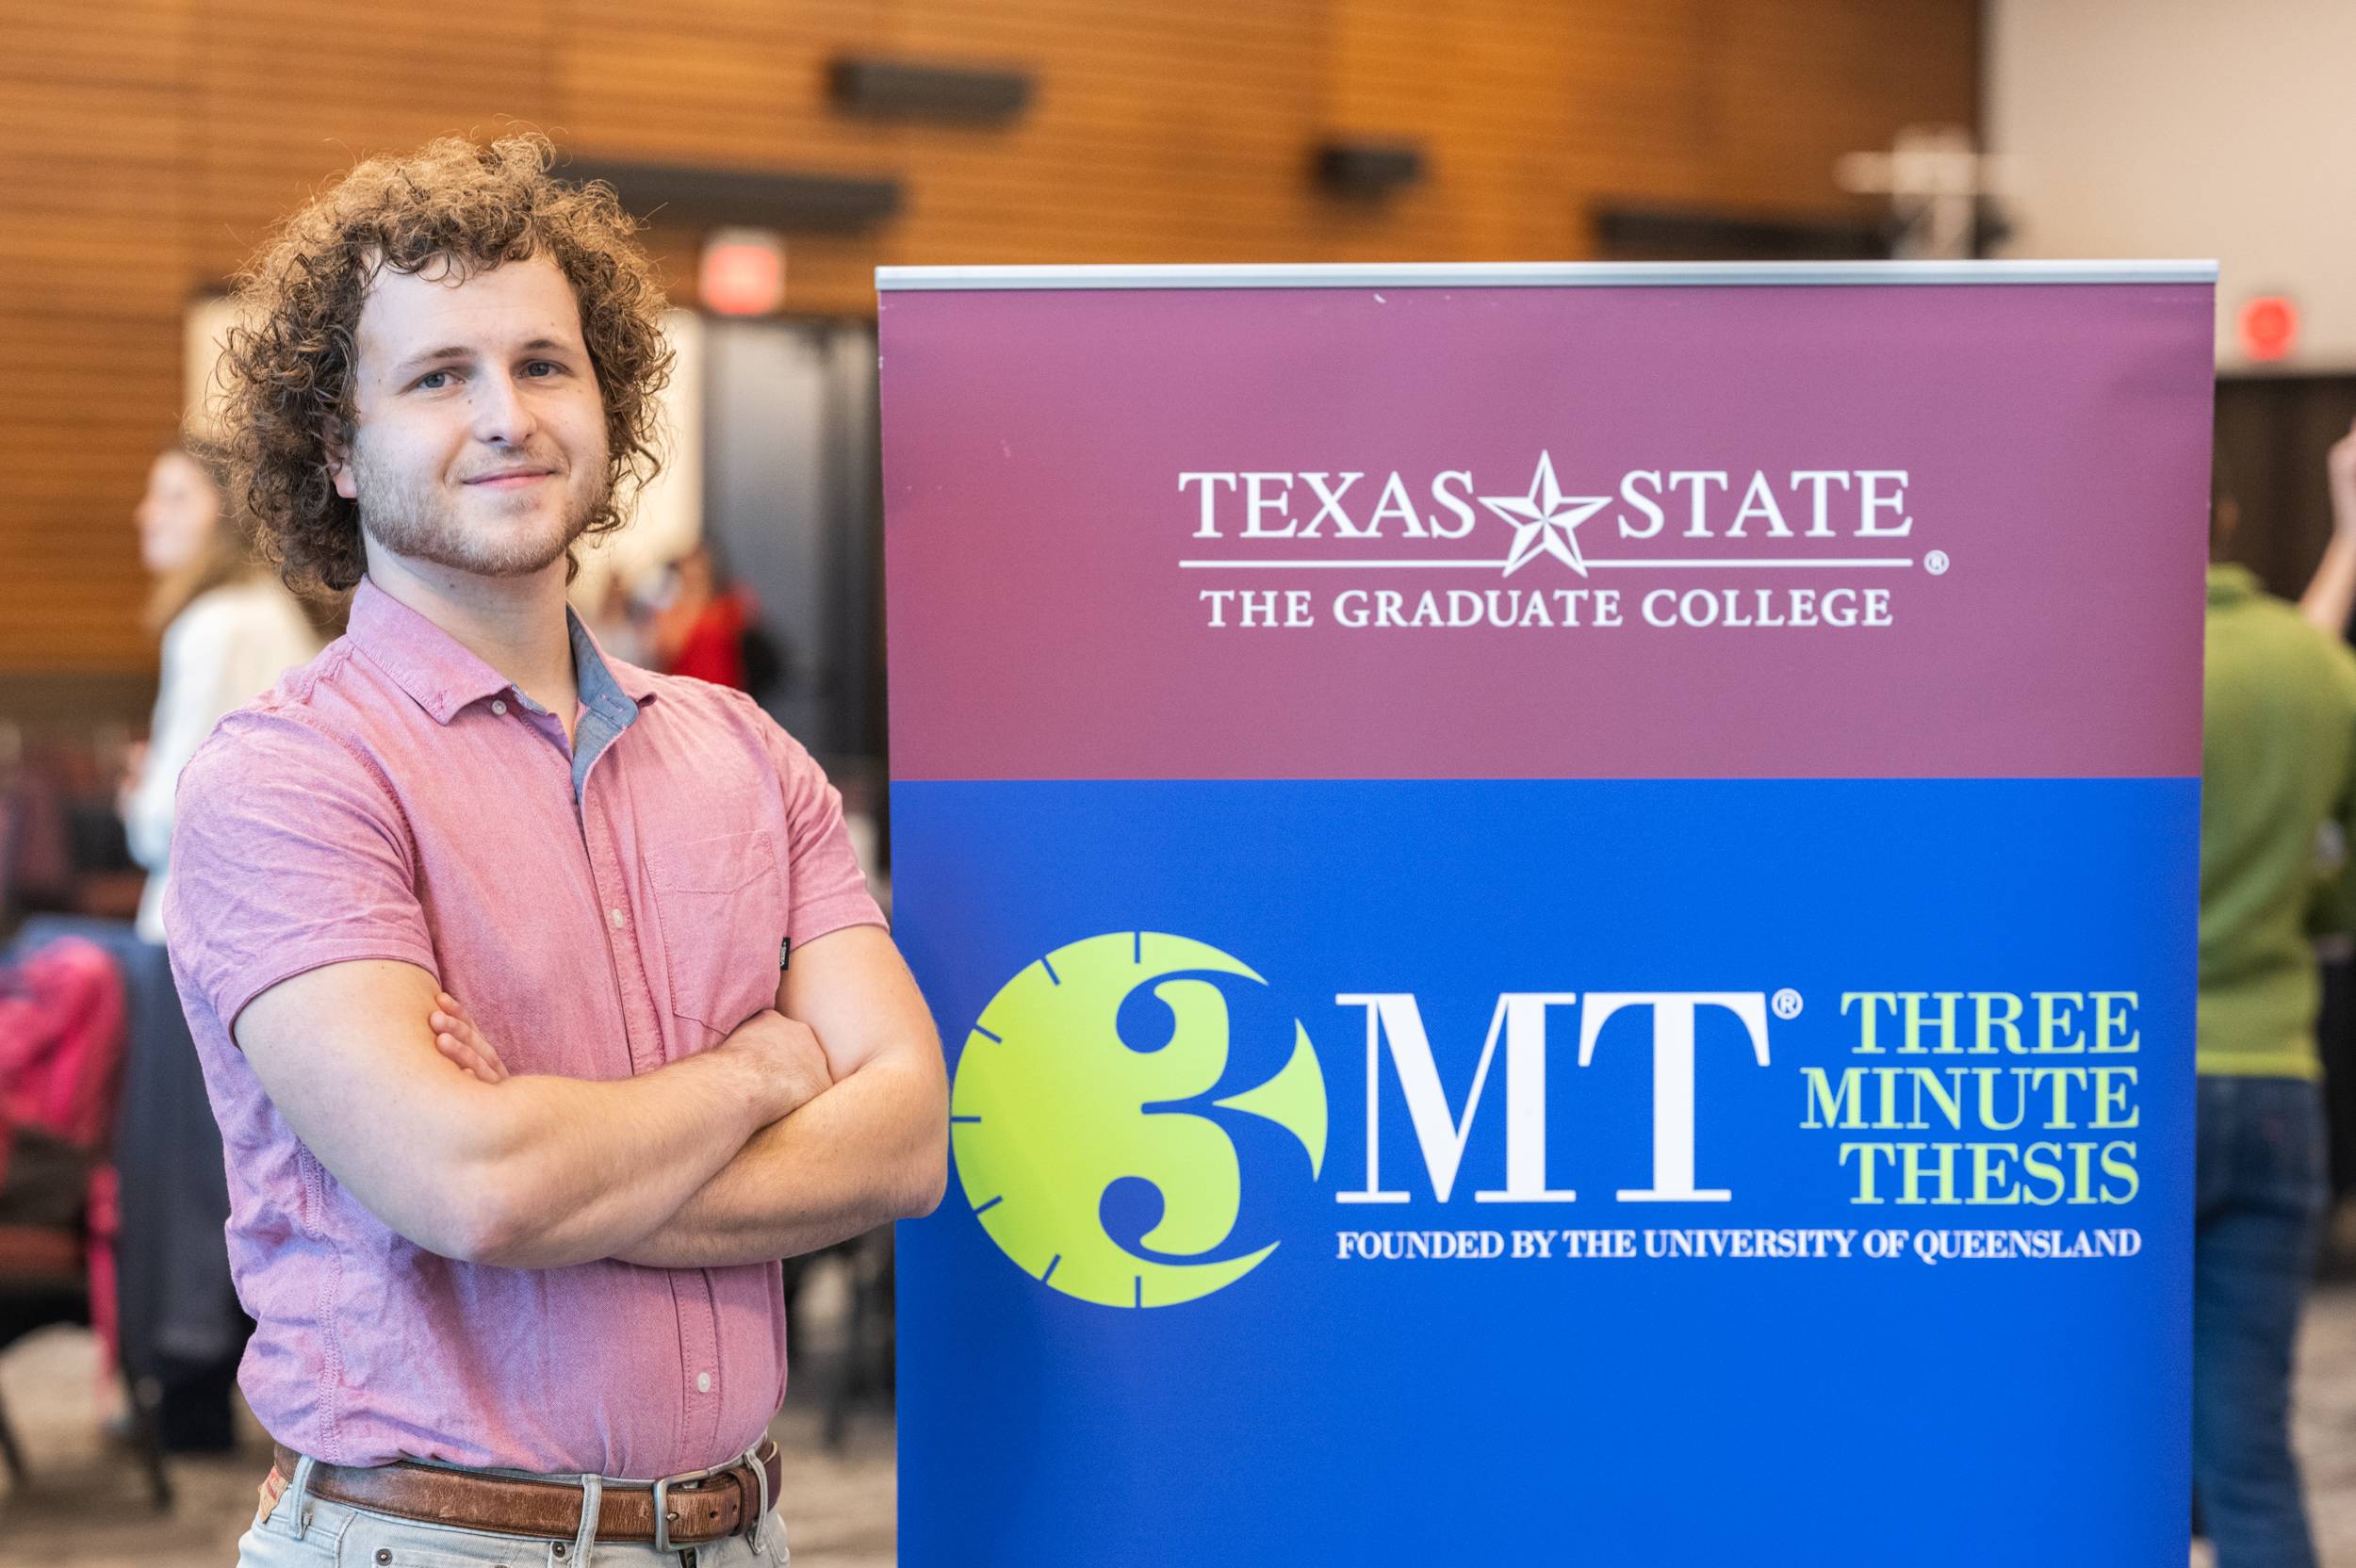 Joshua Rogalski standing next to a 3MT sign with her arms crossed